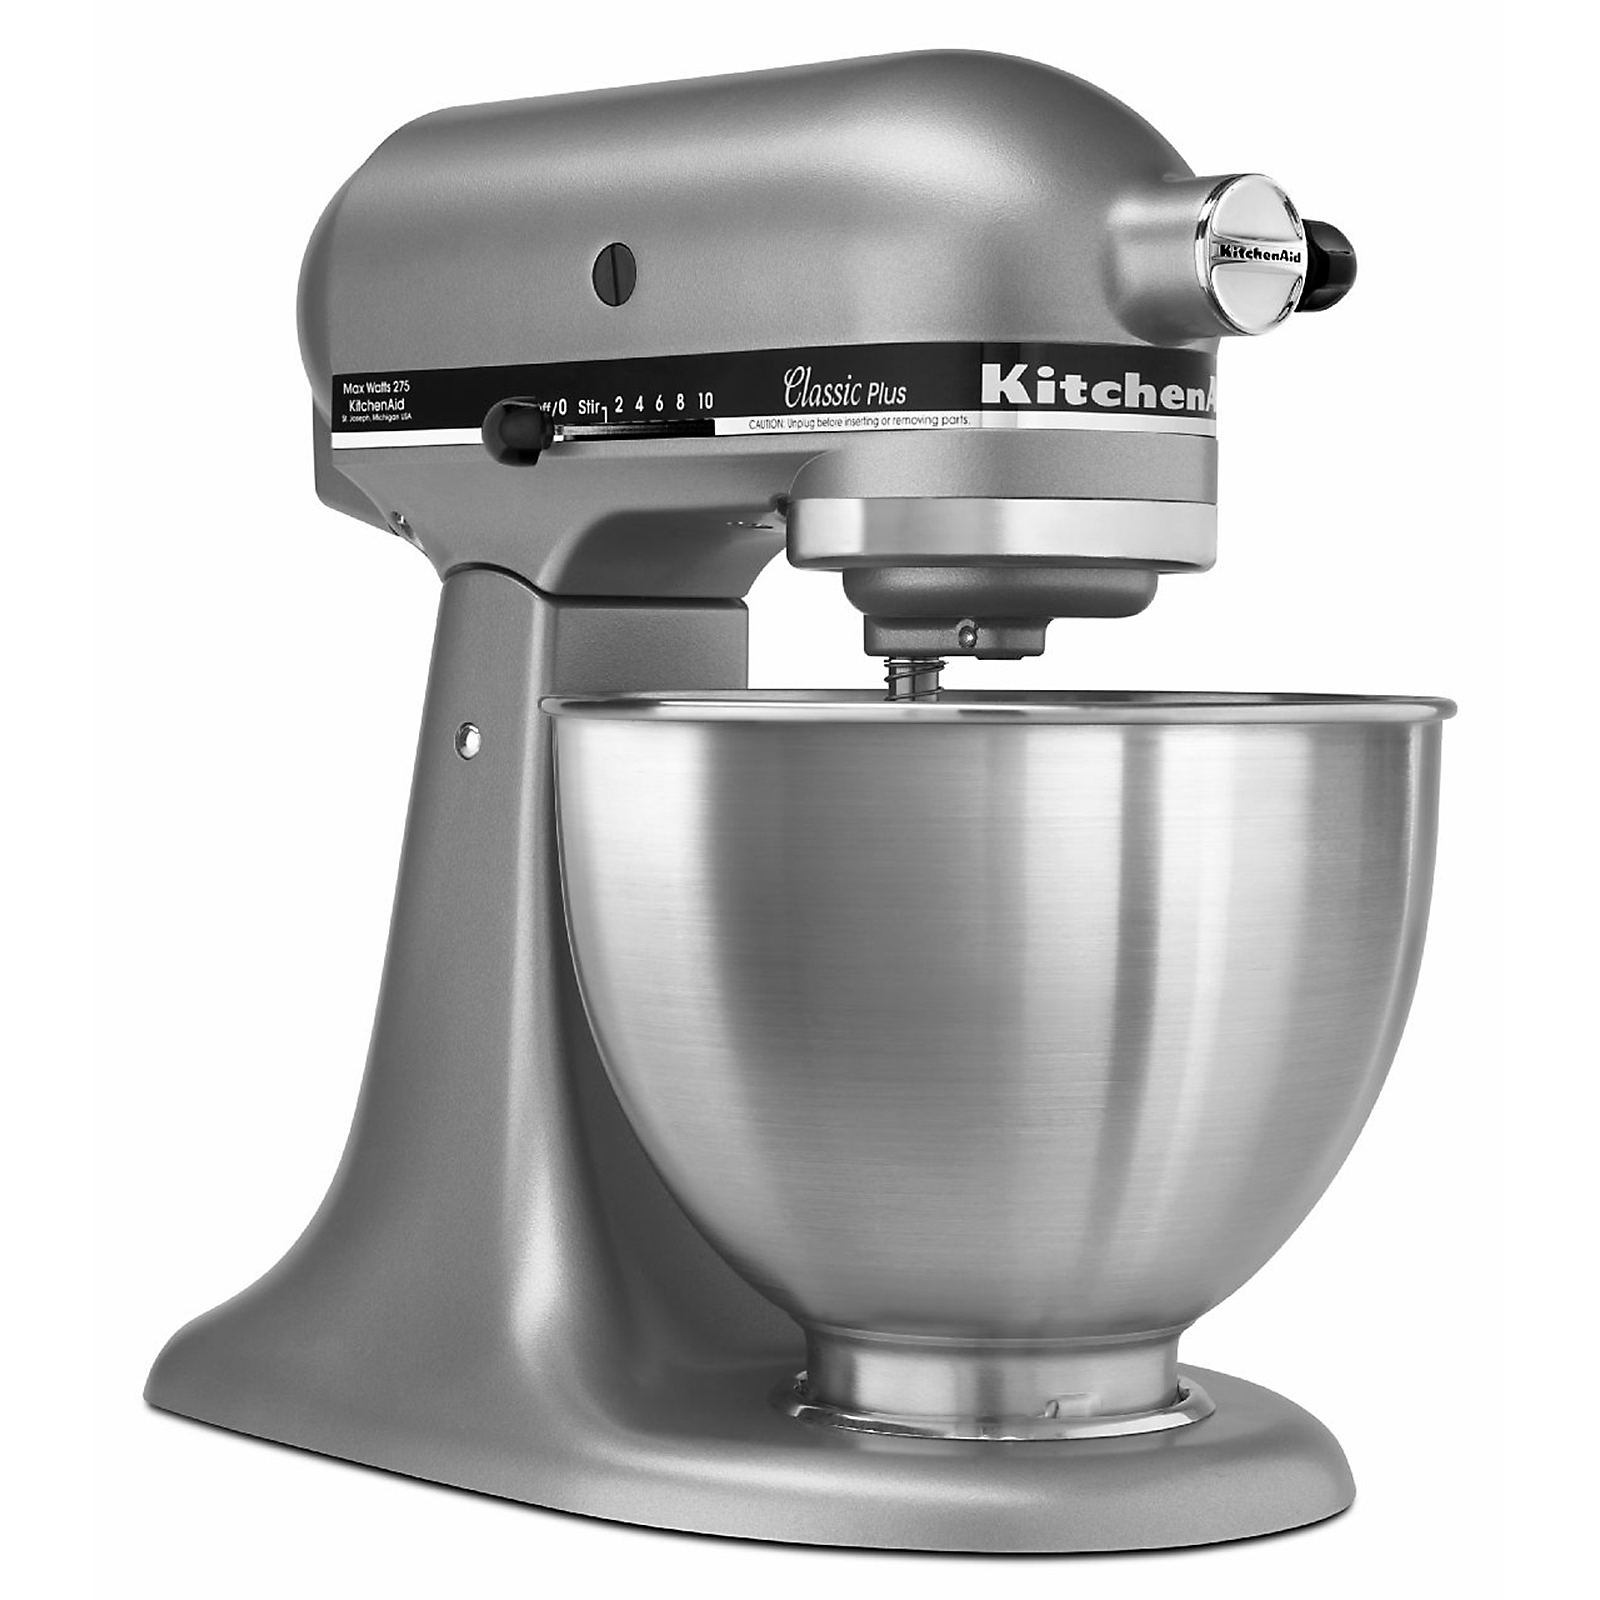 Does KitchenAid offer copper bowls for its stand mixers?